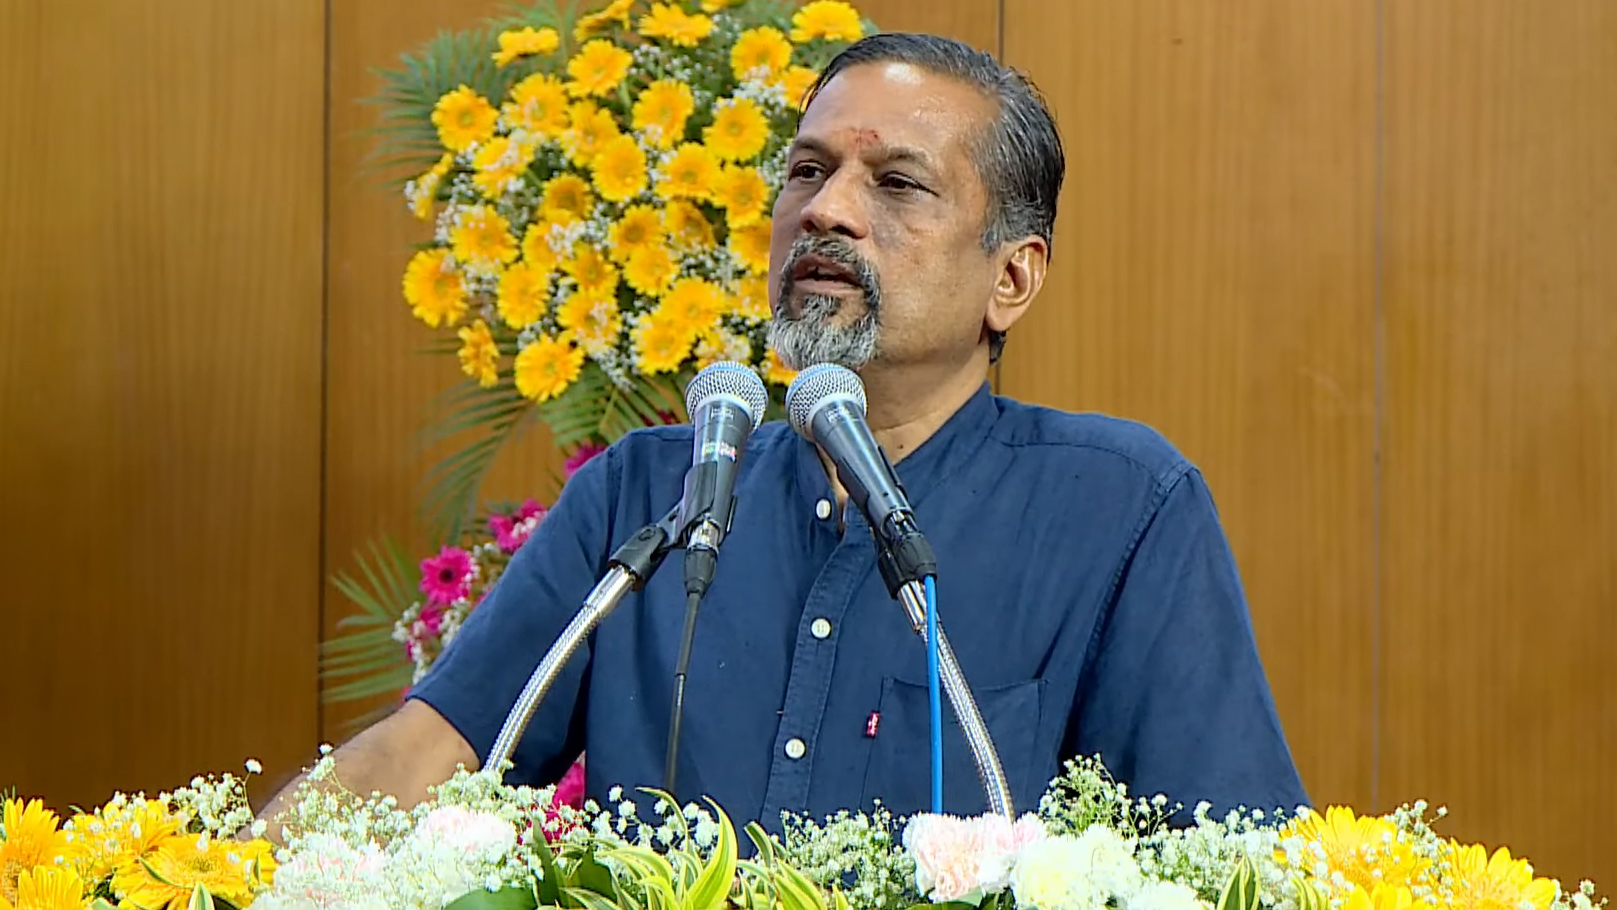 Dr.-Sridhar-Vembu-Founder-and-CEO-Zoho-Corporation-addresses-the-64th-Institute-Day-today-20th-April-2023-at-IIT-Madras.jpg